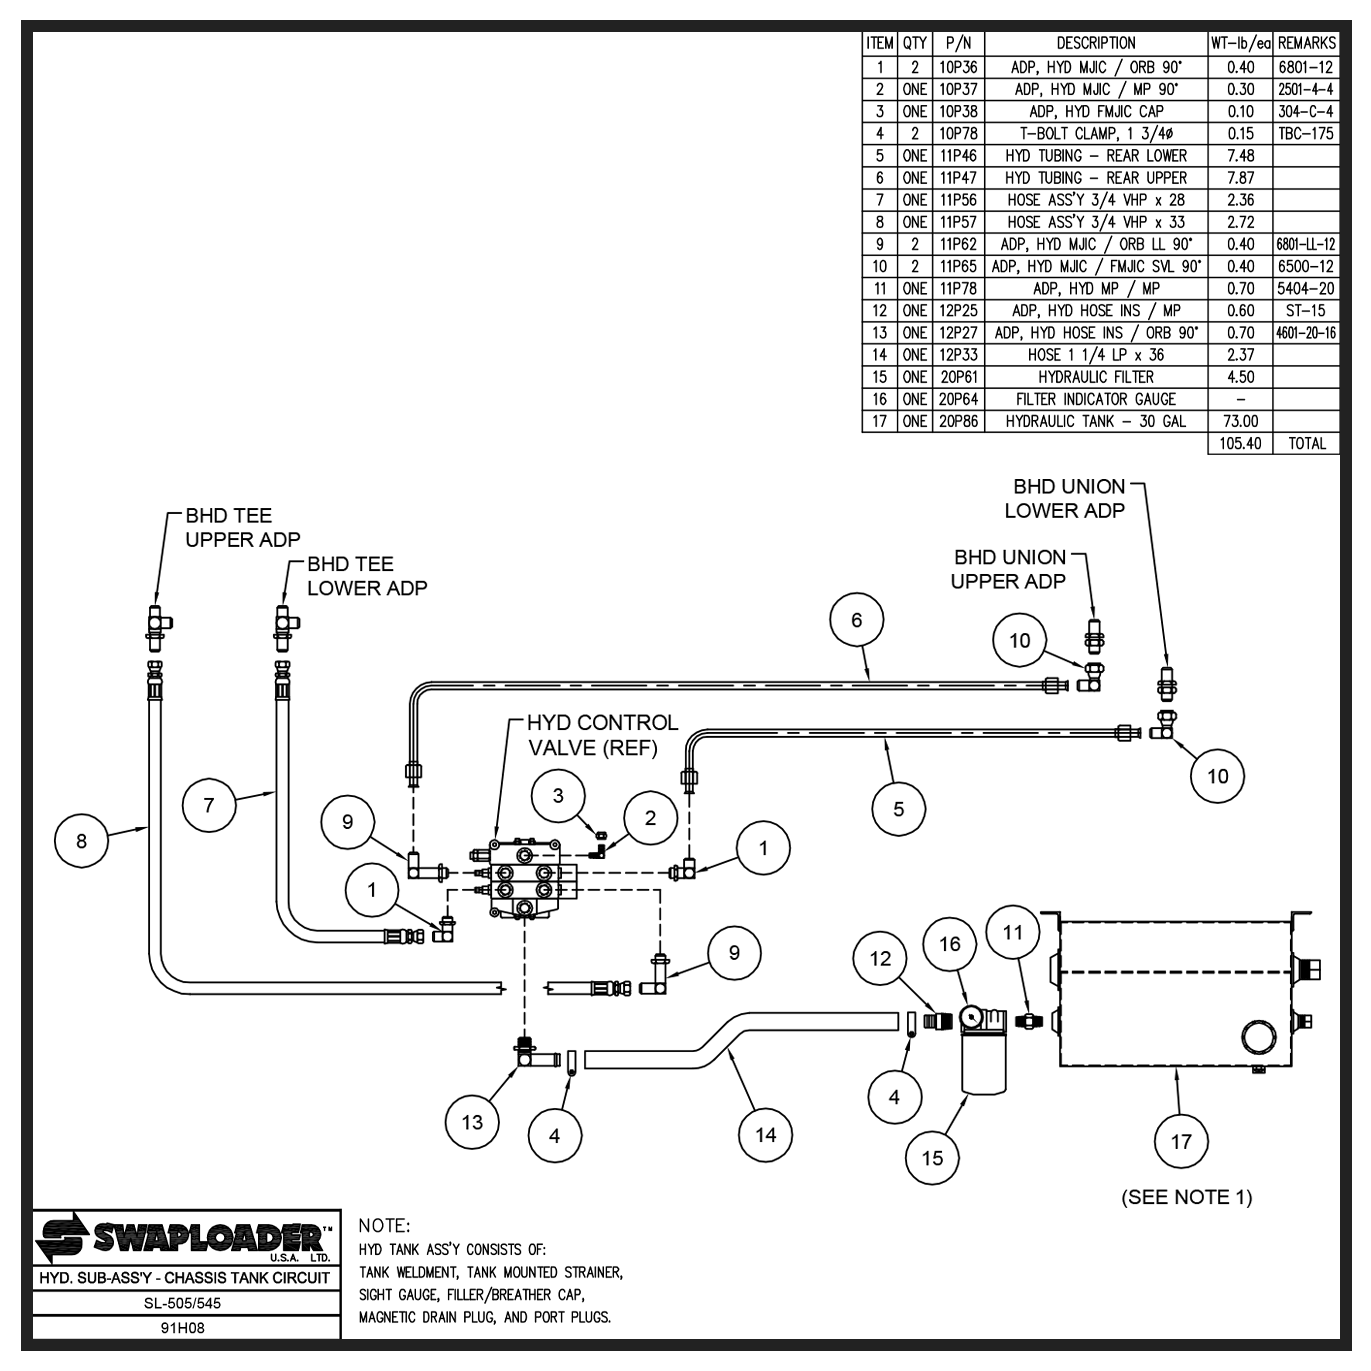 Swaploader SL-505/545 Hydraulic Sub-Assembly Chassis Tank Circuit Diagram